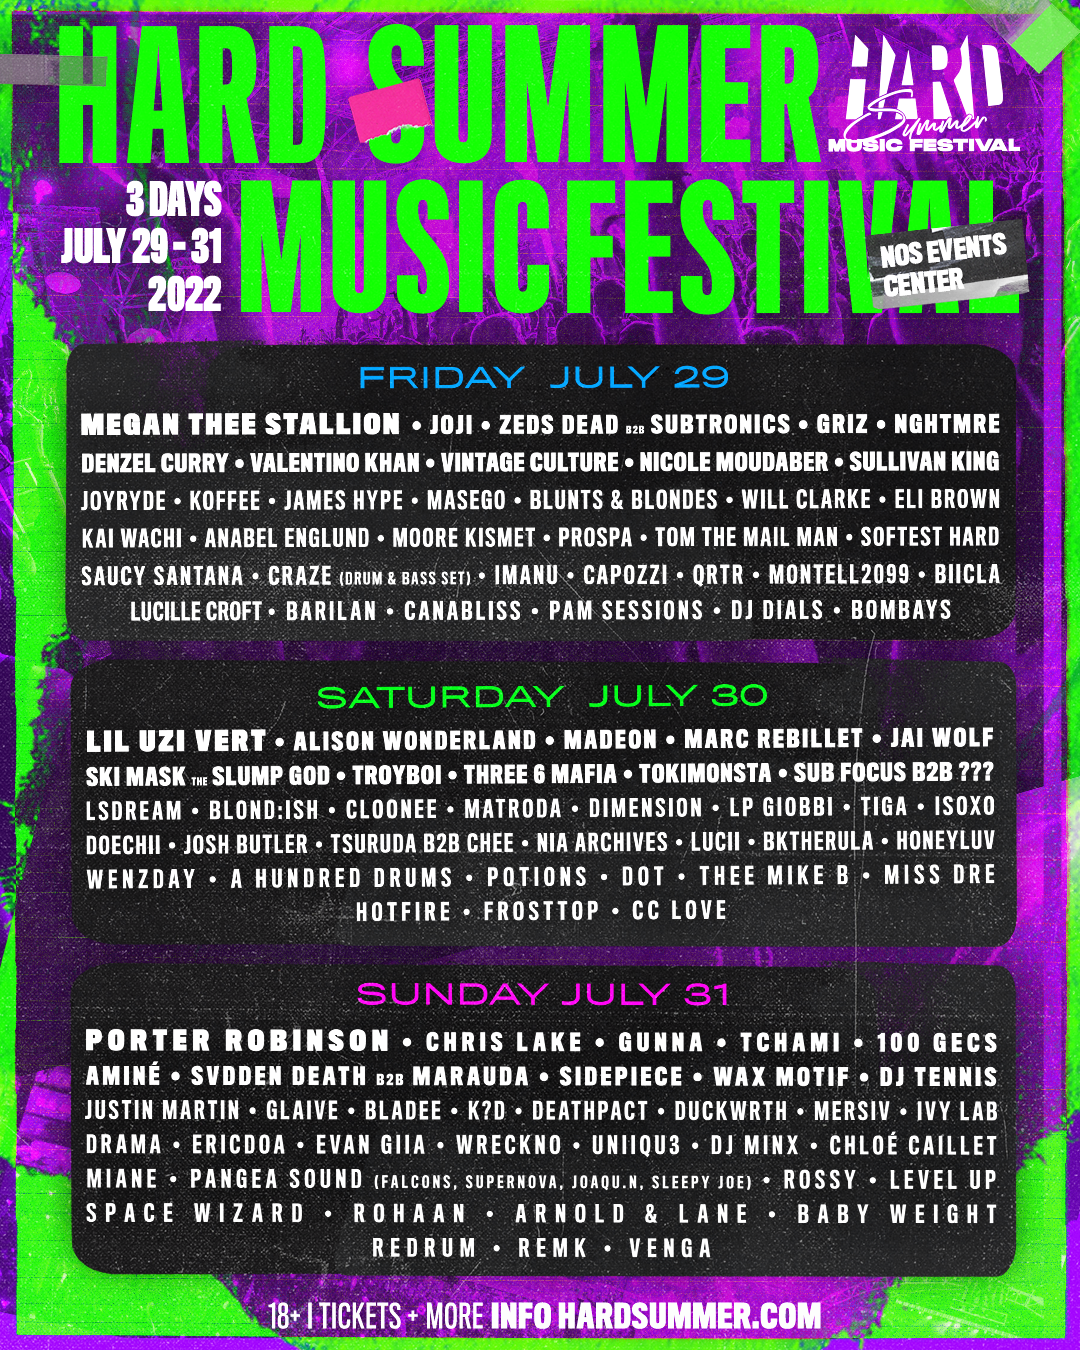 Hard Summer festival flyer is pictured